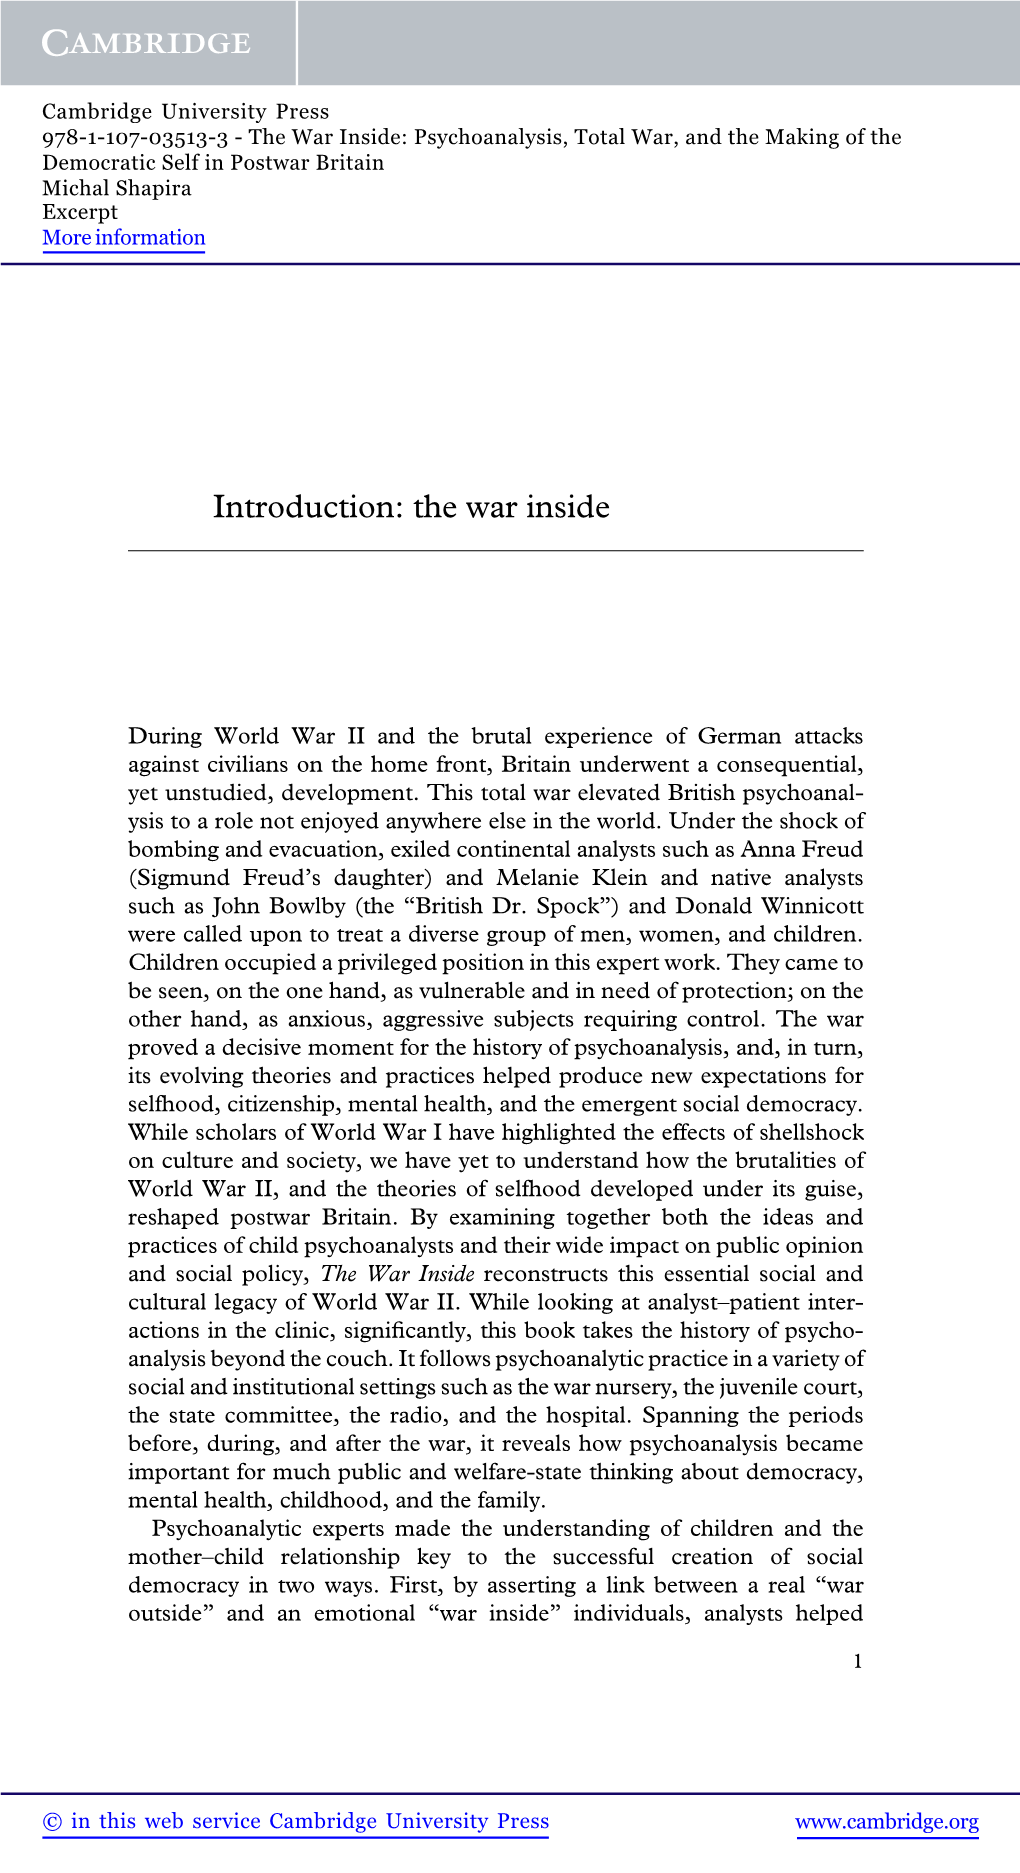 Introduction: the War Inside